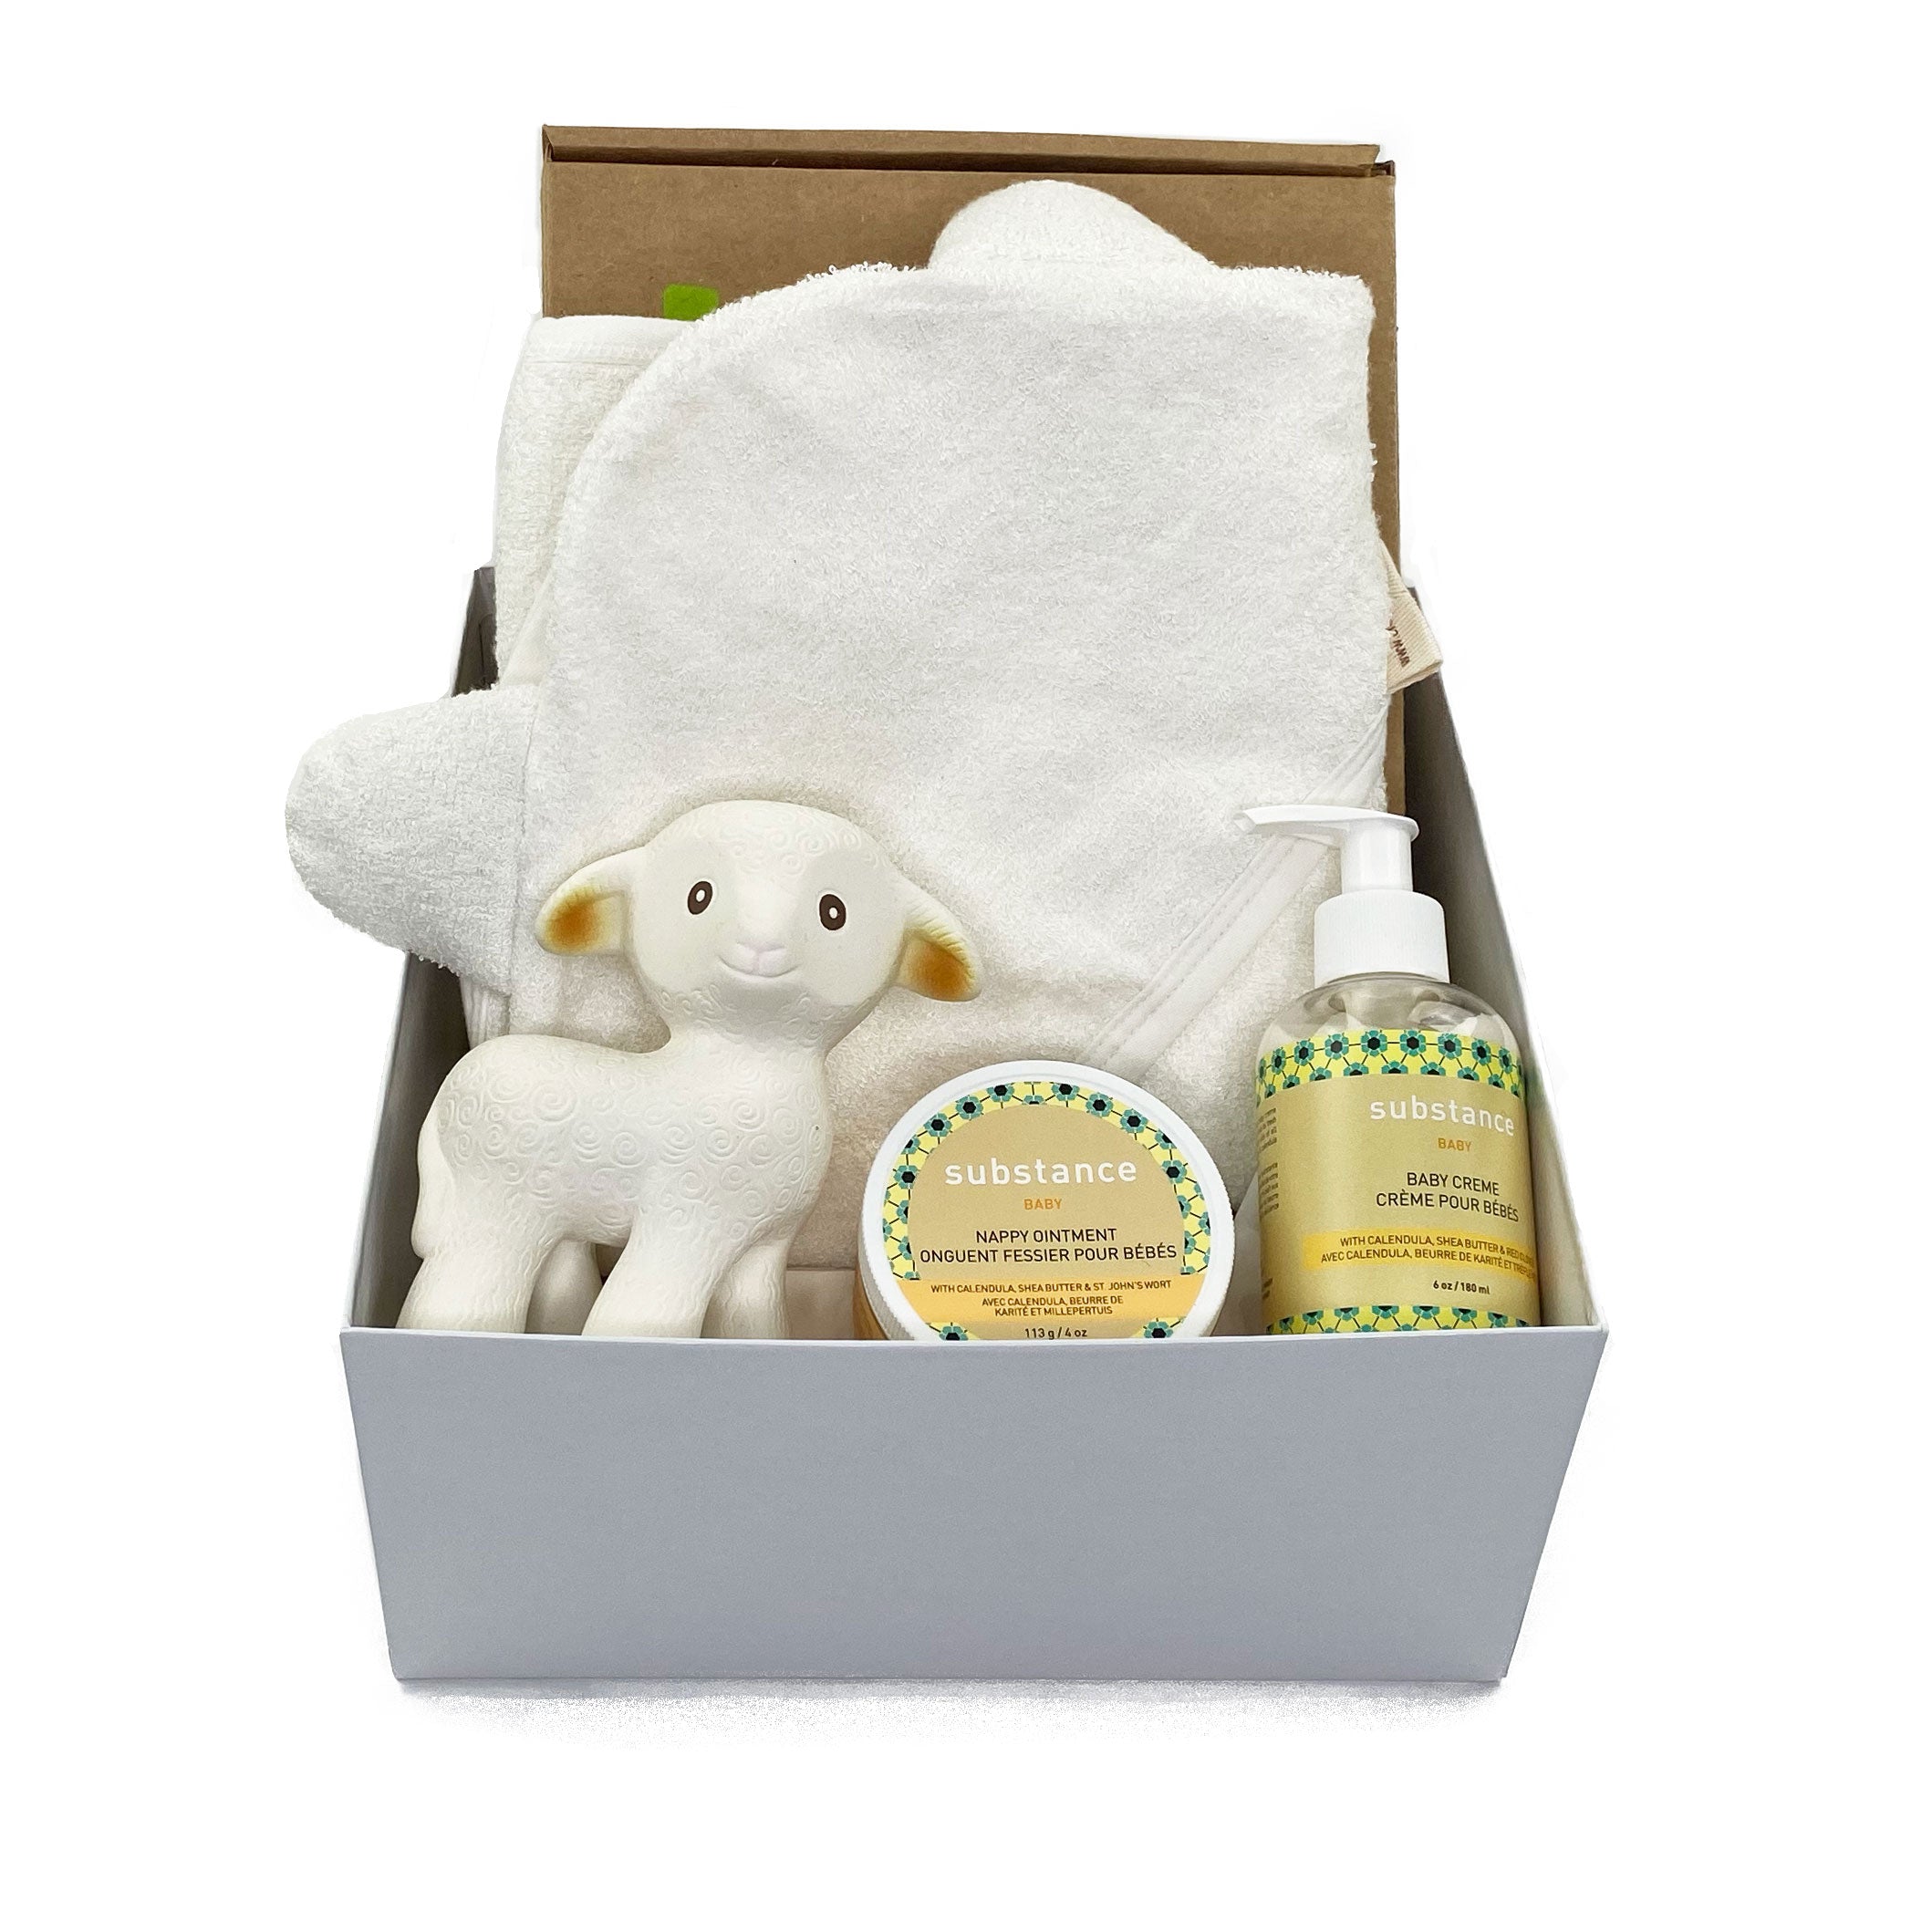 Practical Baby Gift Box with soft bamboo towel, a natural rubber water toy and organic  skin care for your baby's  after bath routine at Bonjour Baby Baskets